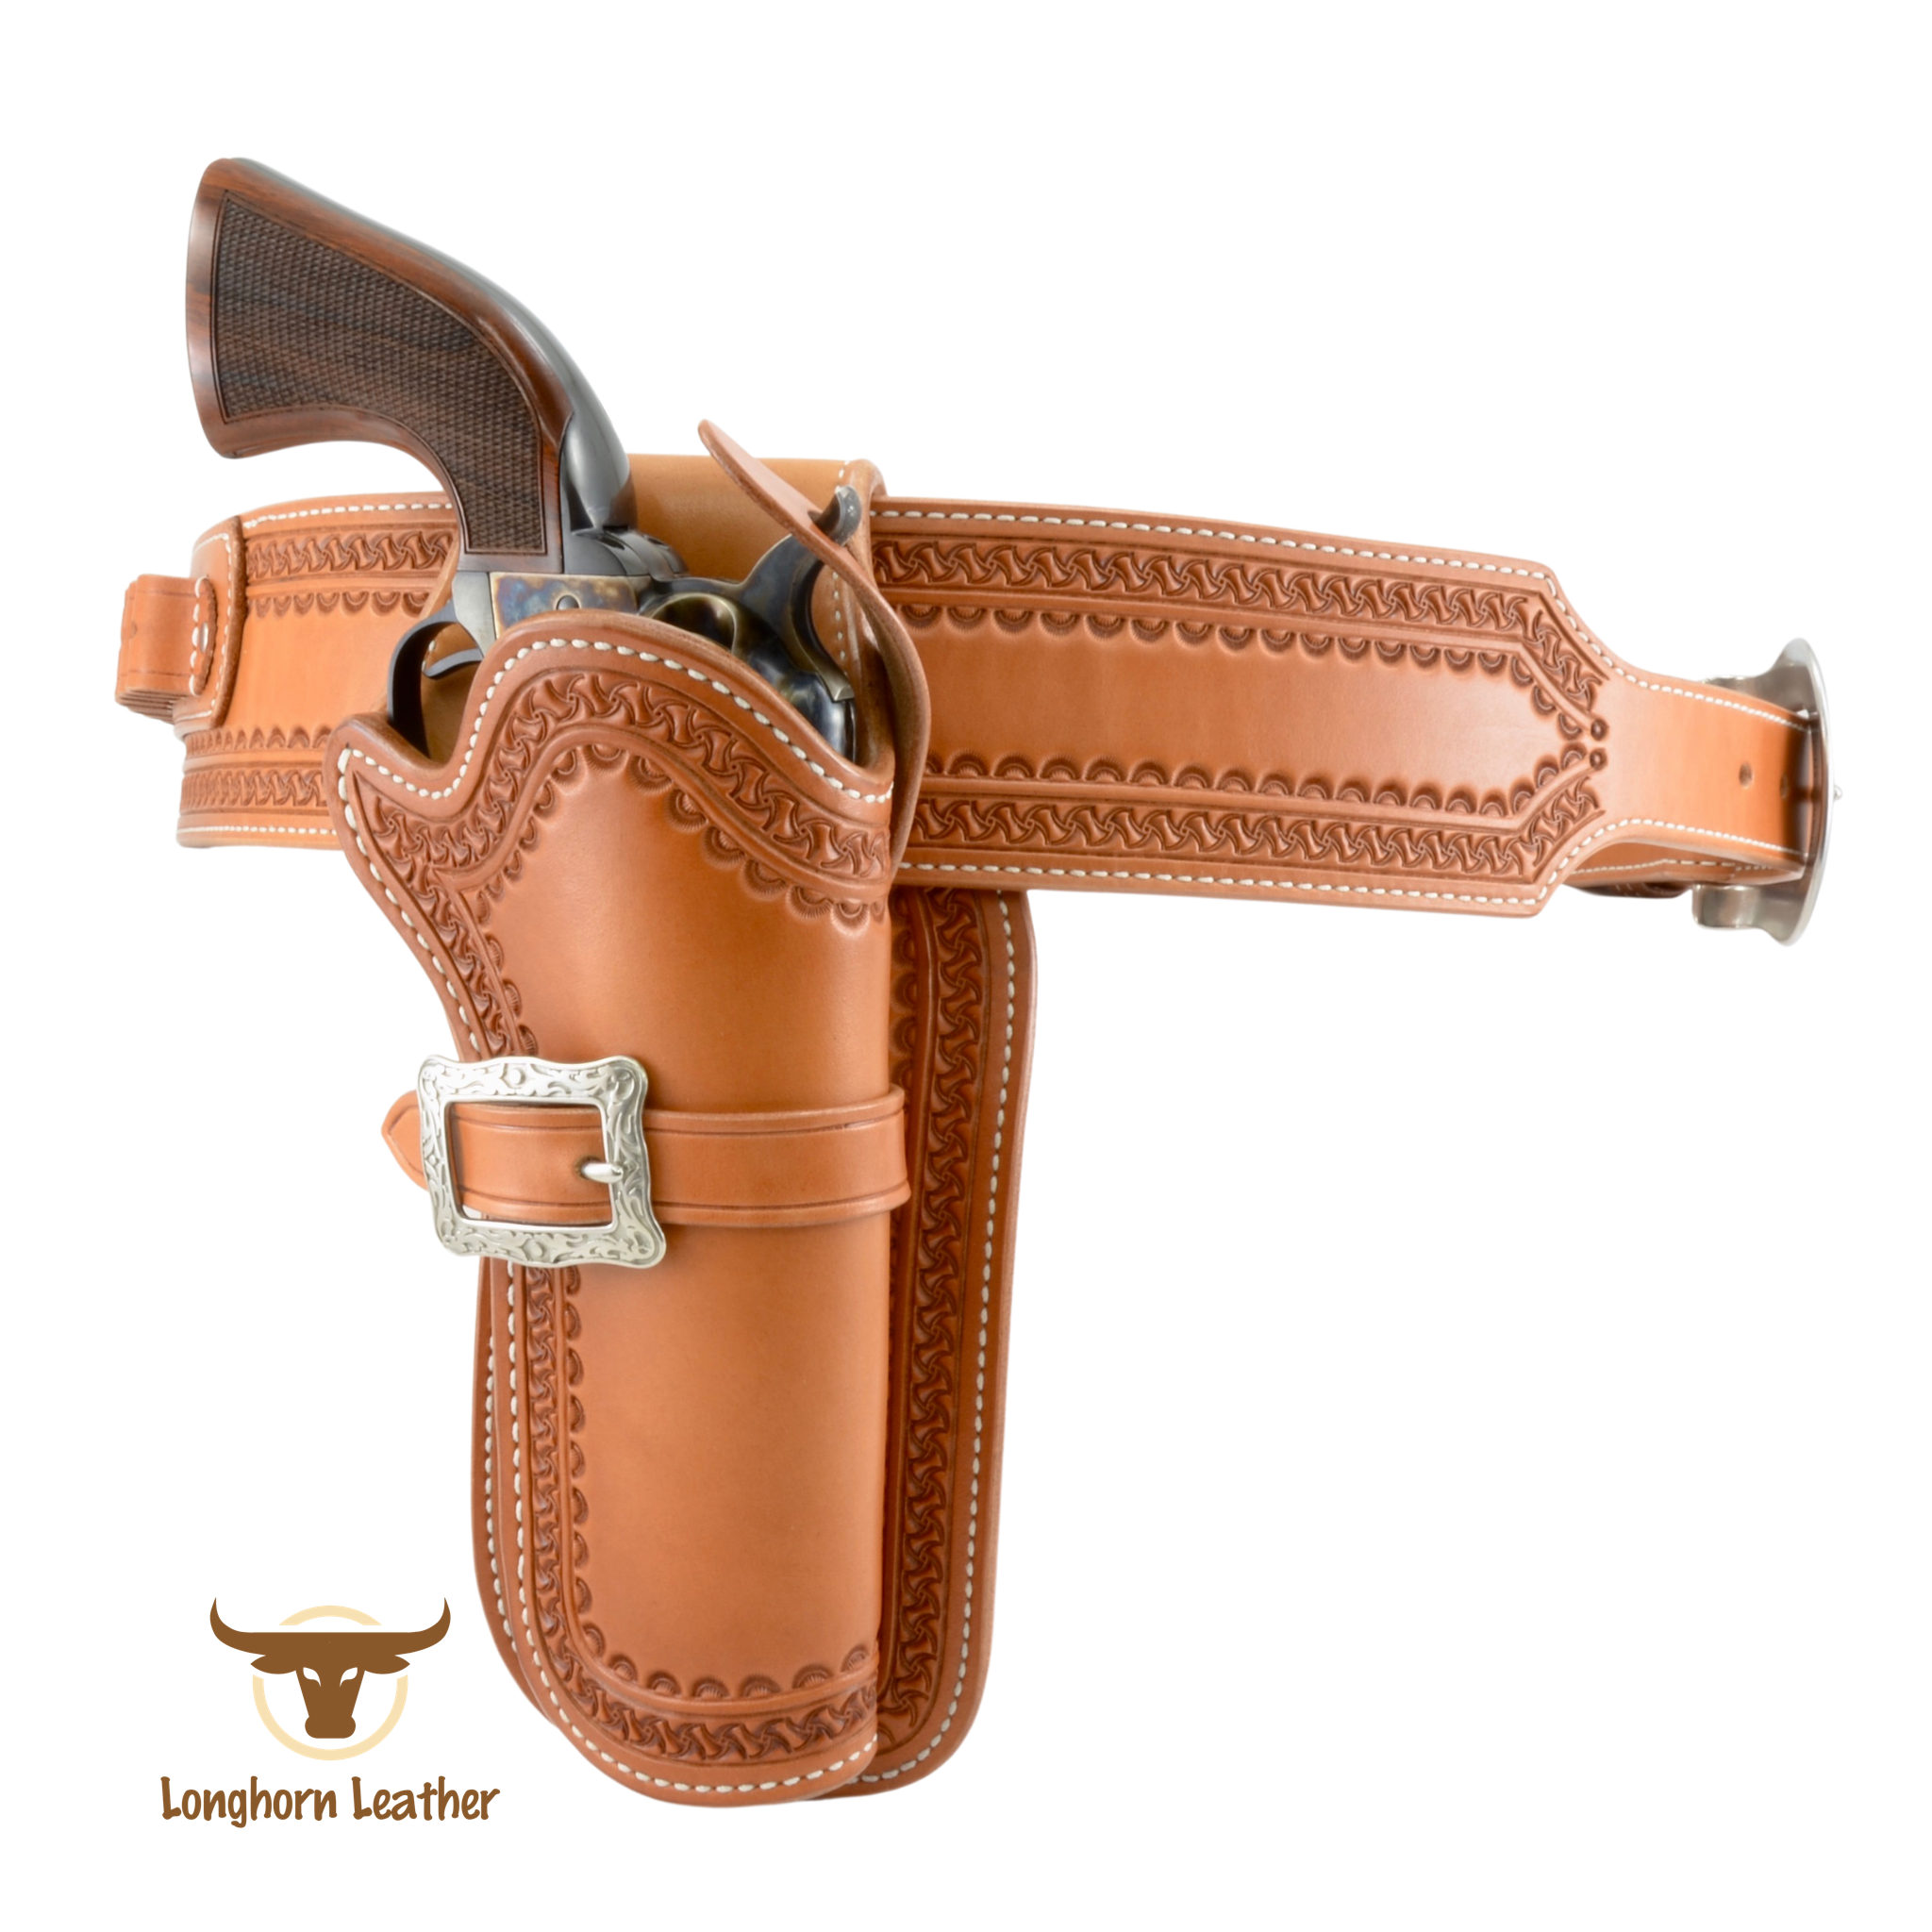 Custom leather single action holster and cartridge belt featuring the "Kingman" design.  Individually handcrafted at Longhorn Leather AZ.